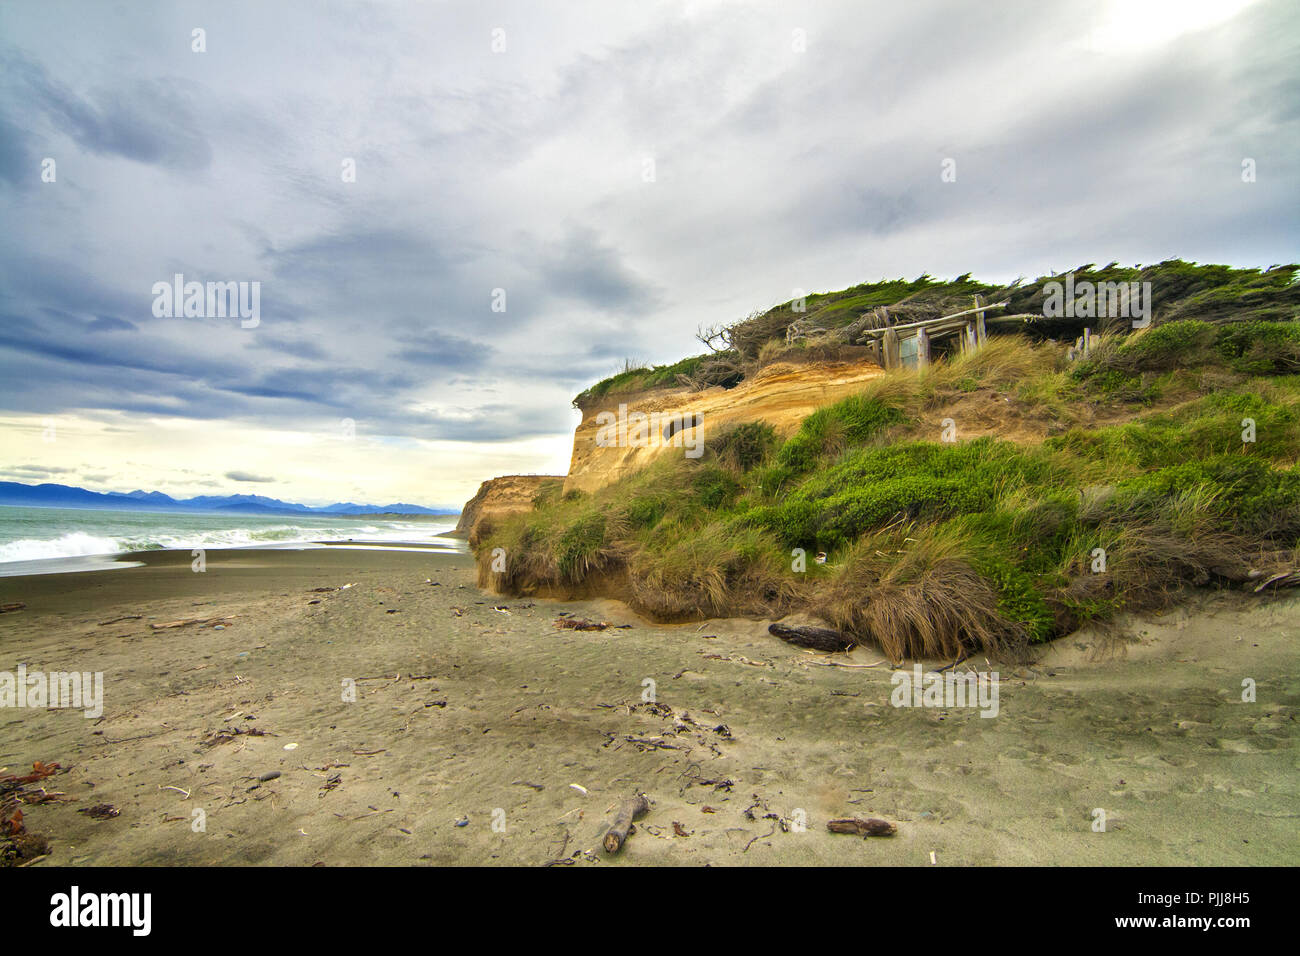 Wild Southern Pacific Ocean beach with wind shaped trees, cliff rocks and wooden beach shelter in Catlins, Gemstone beach, near Orepuki in New Zealand Stock Photo